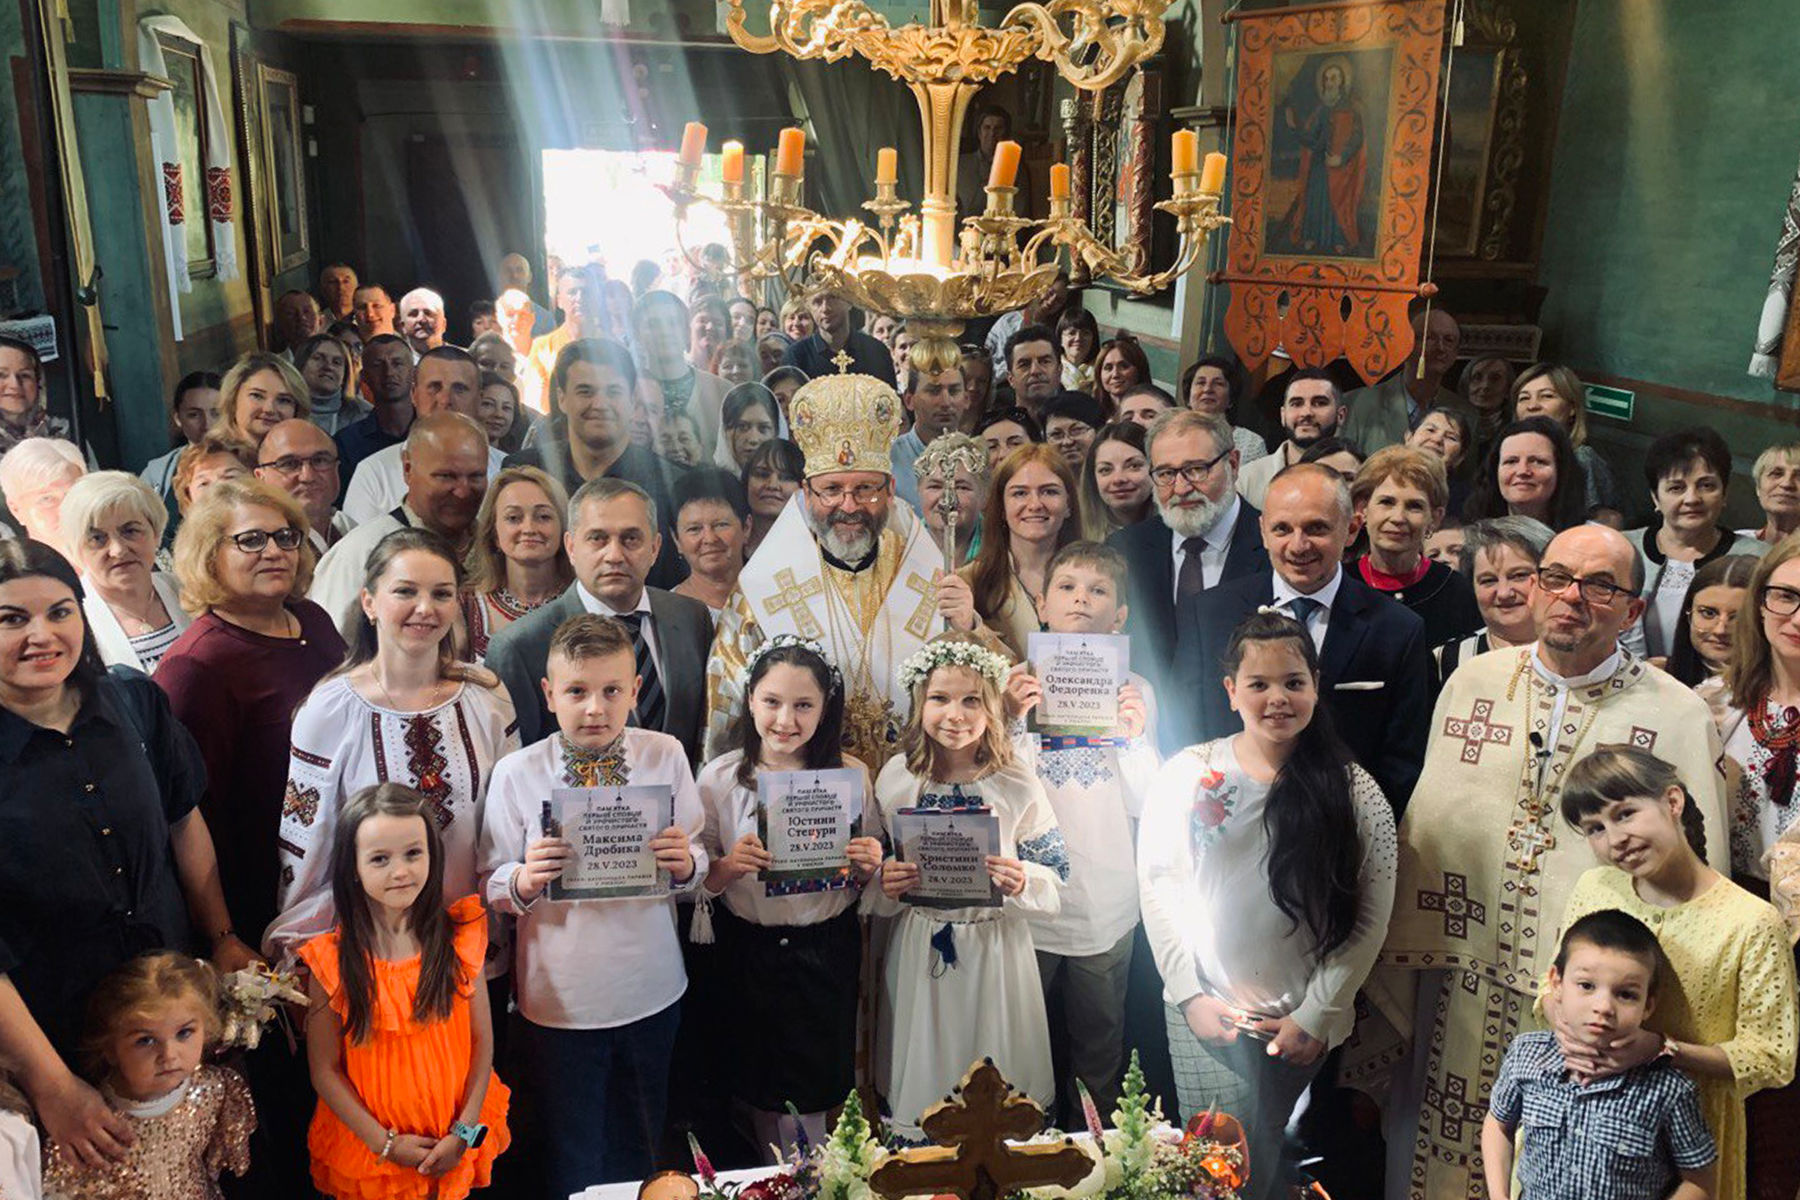 “Let us unite to win”: His Beatitude Sviatoslav in Lublin